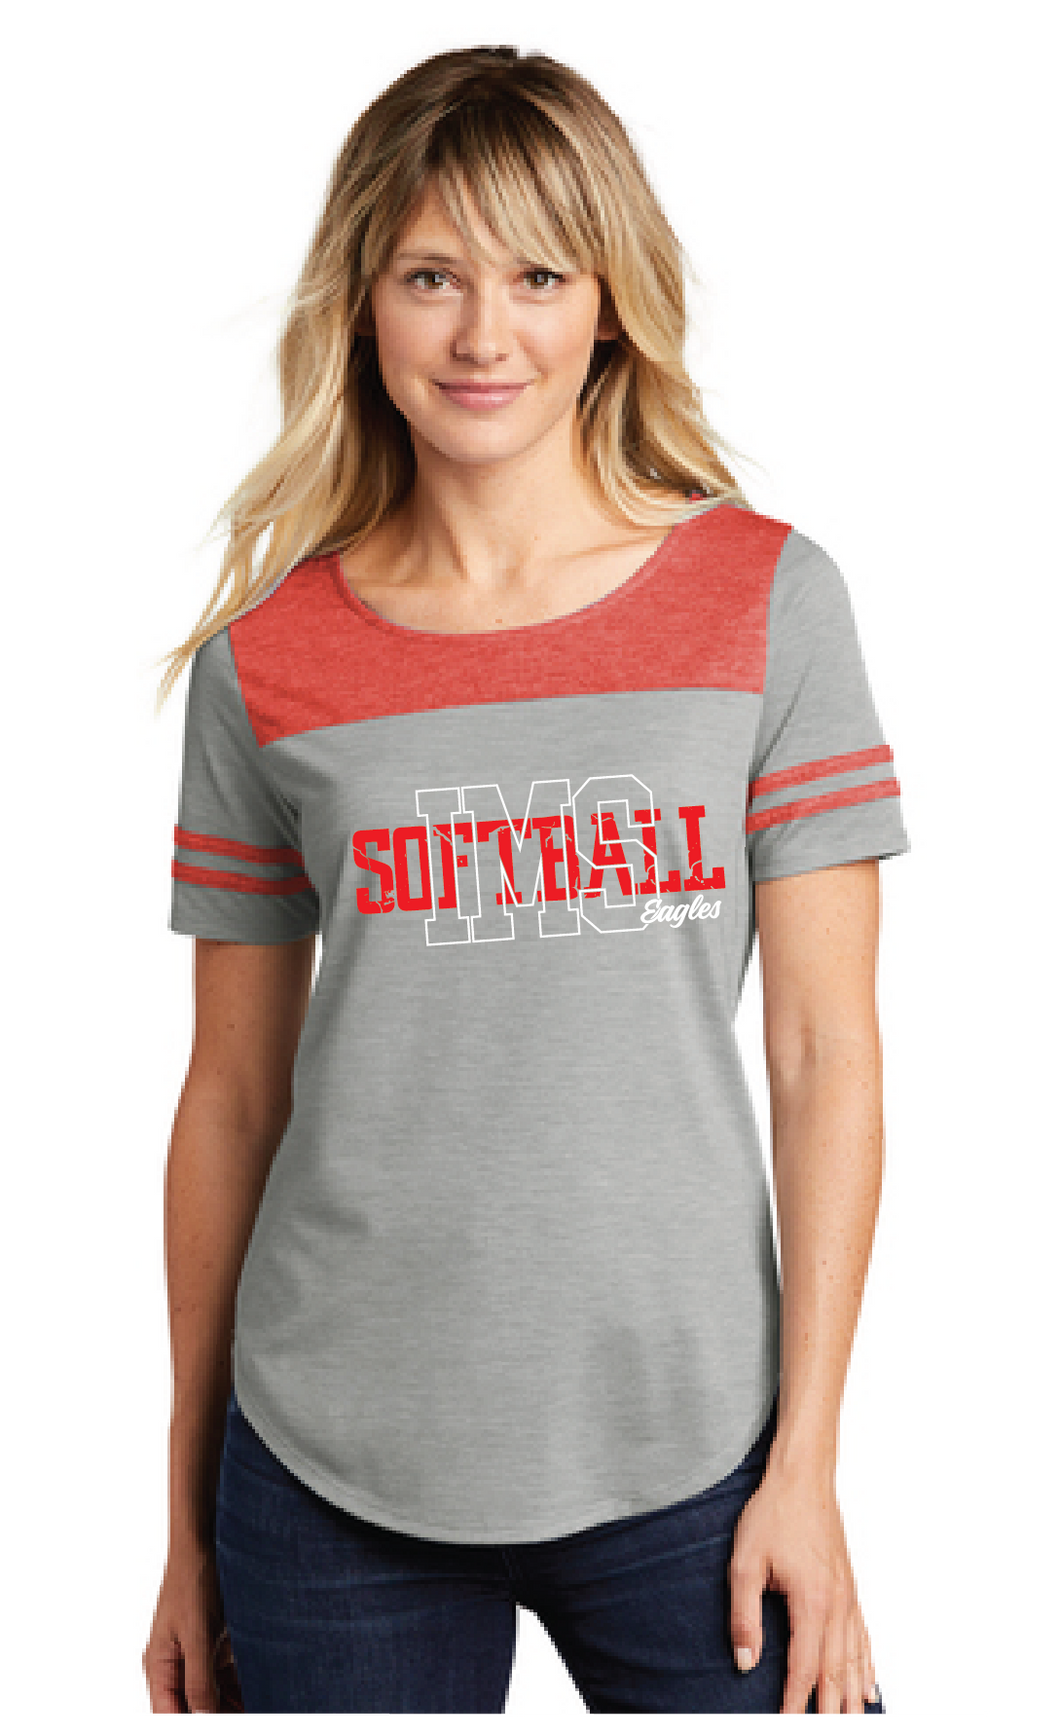 Ladies Tri-Blend Wicking Fan Tee / Red/Grey Heather  / Independence Middle School Softball